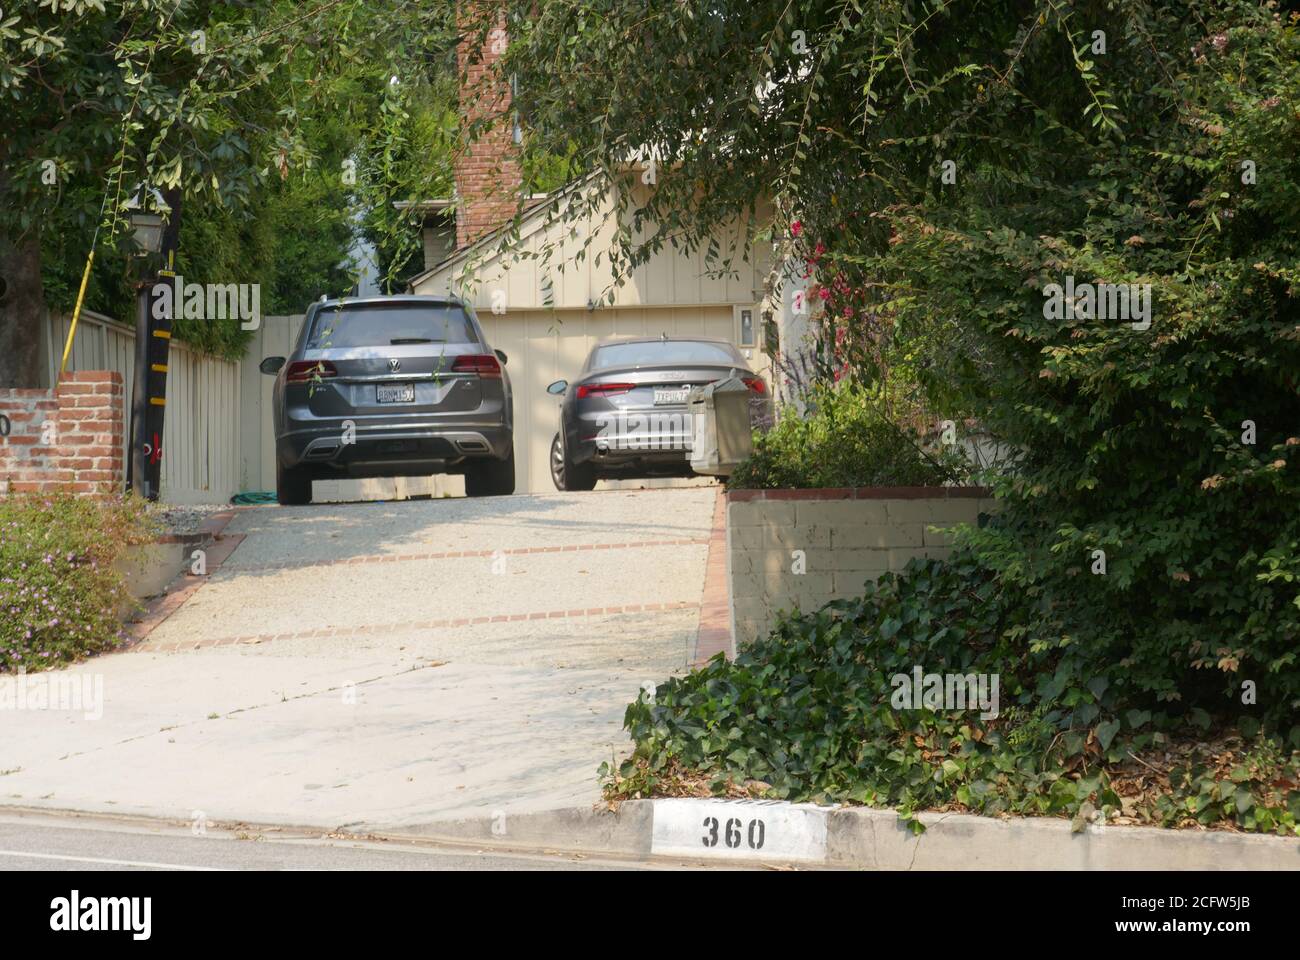 Los Angeles, California, USA 7th September 2020 A general view of atmosphere of actor Montgomery Clift's former home on September 7, 2020 at 360 N.Kenter Avenue in Los Angeles, California, USA. Photo by Barry King/Alamy Stock Photo Stock Photo